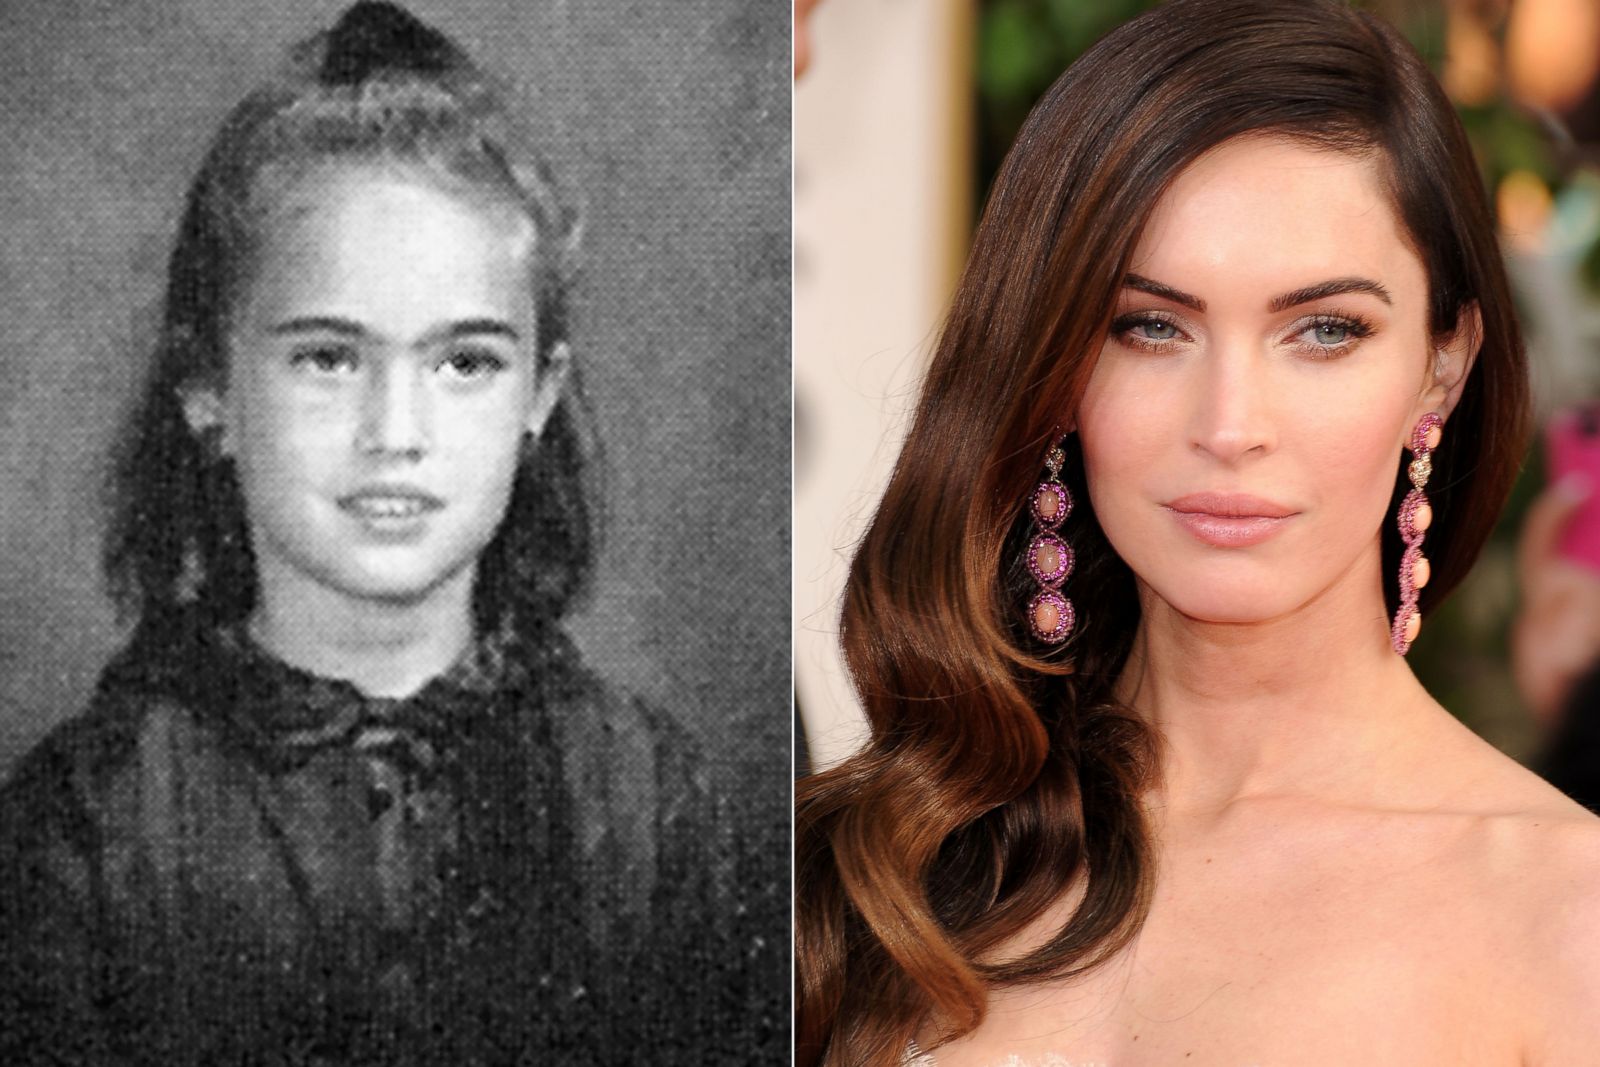 Megan Fox Picture | Before they were famous - ABC News1600 x 1067